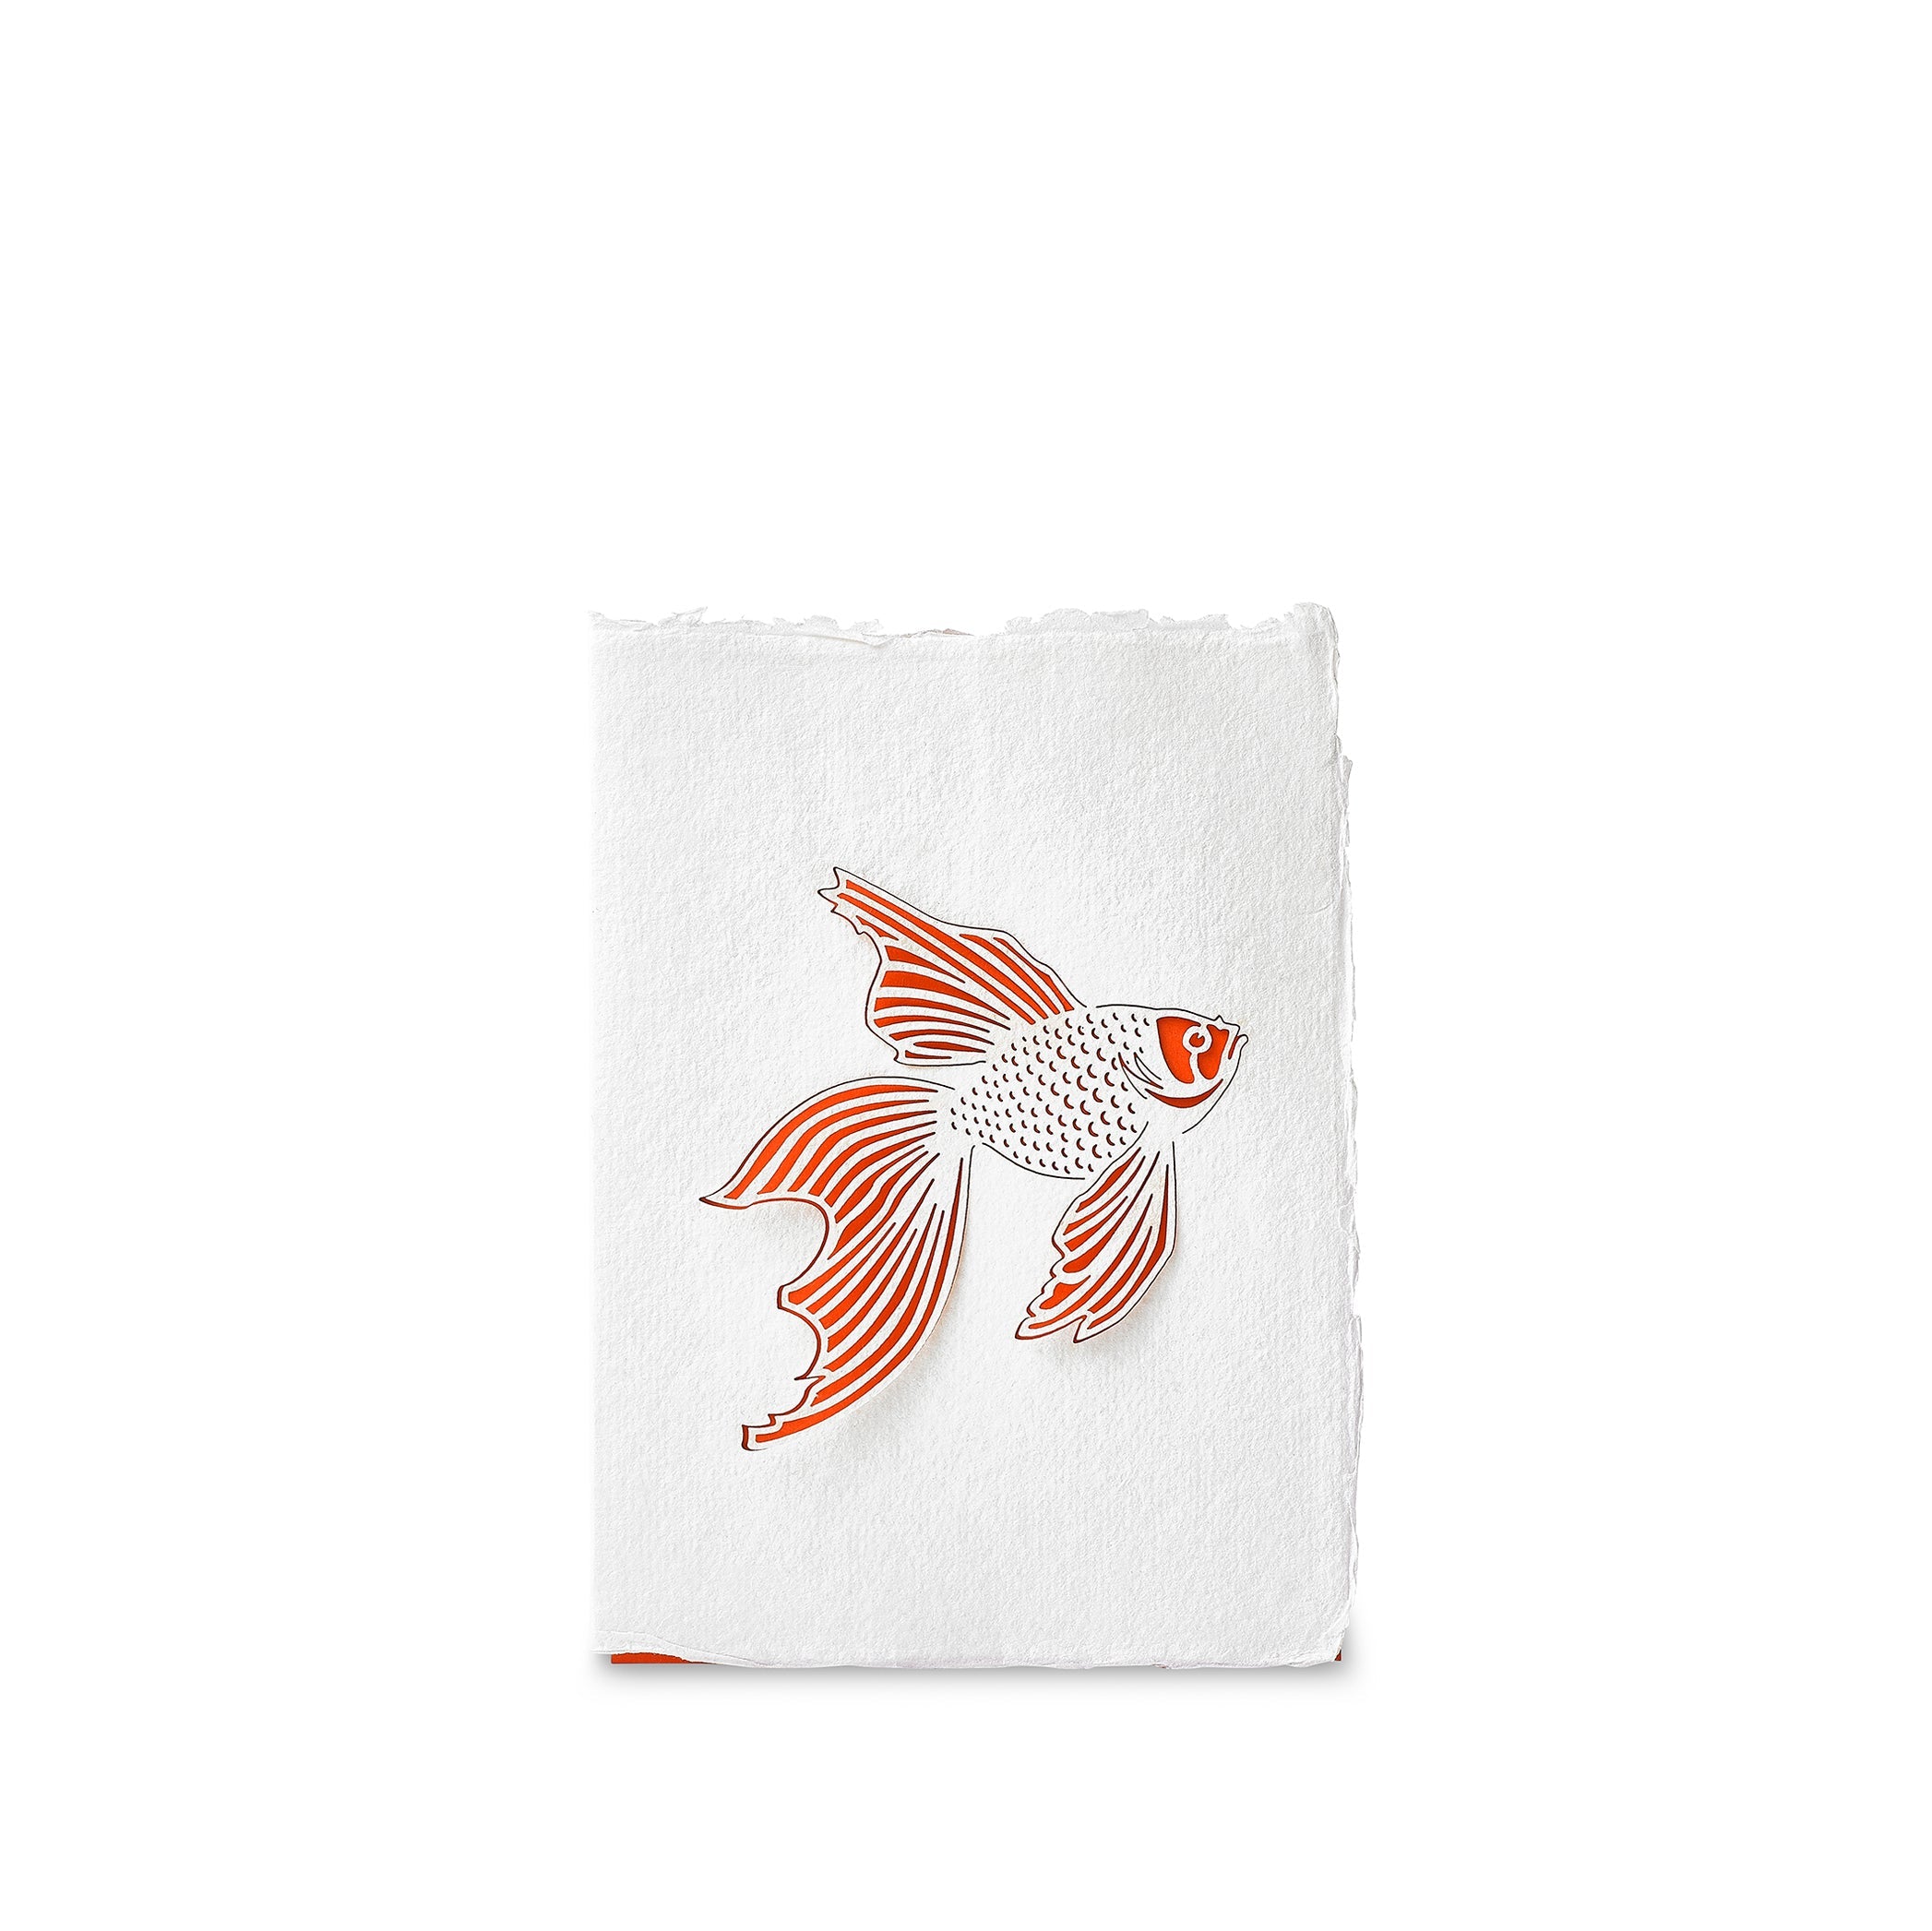 Handmade Paper Greeting Card with Fish, 15cm x 10cm